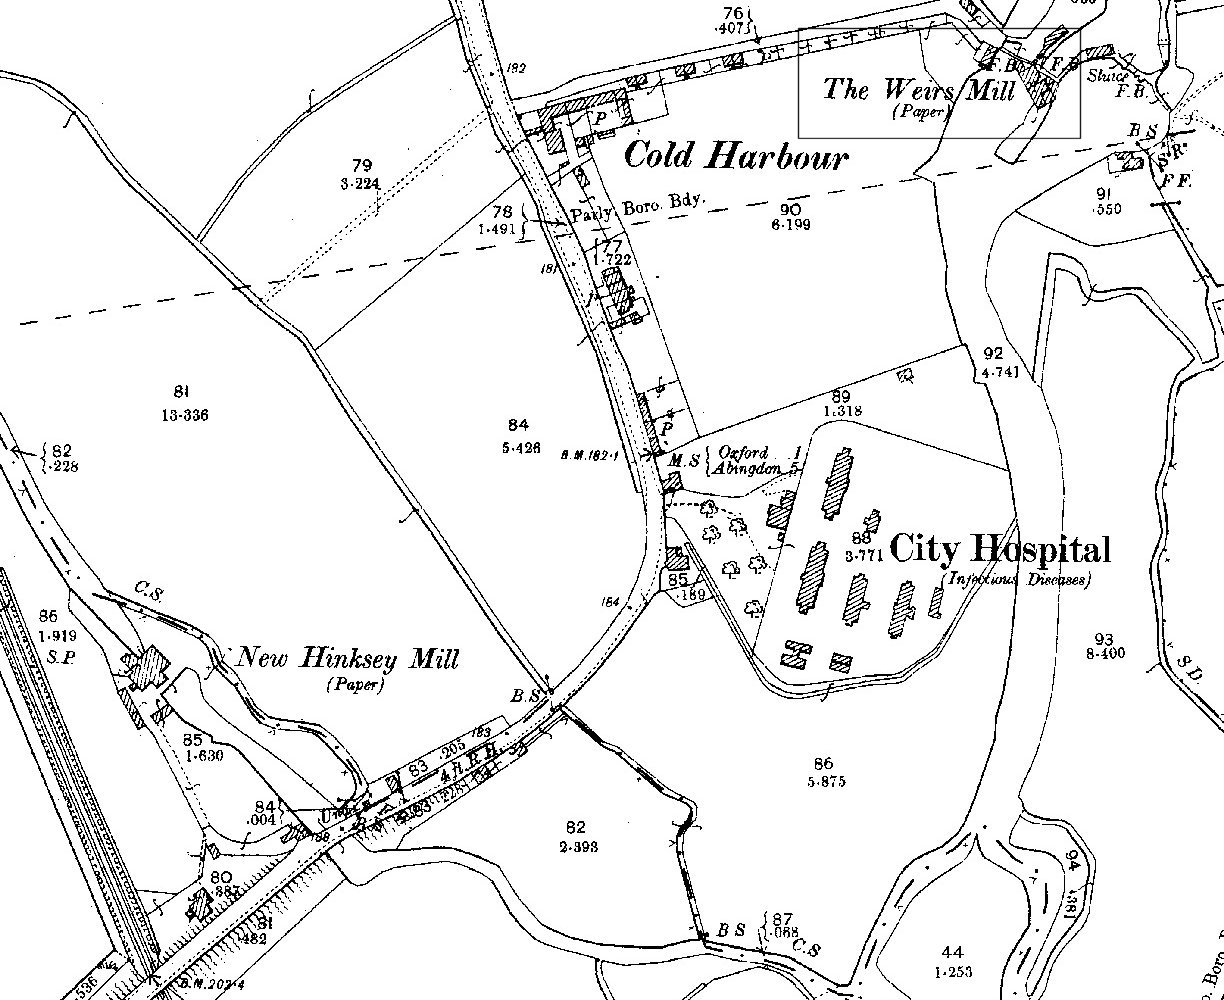 [Cold Harbour OS 1900 Weirs mill highlighted]